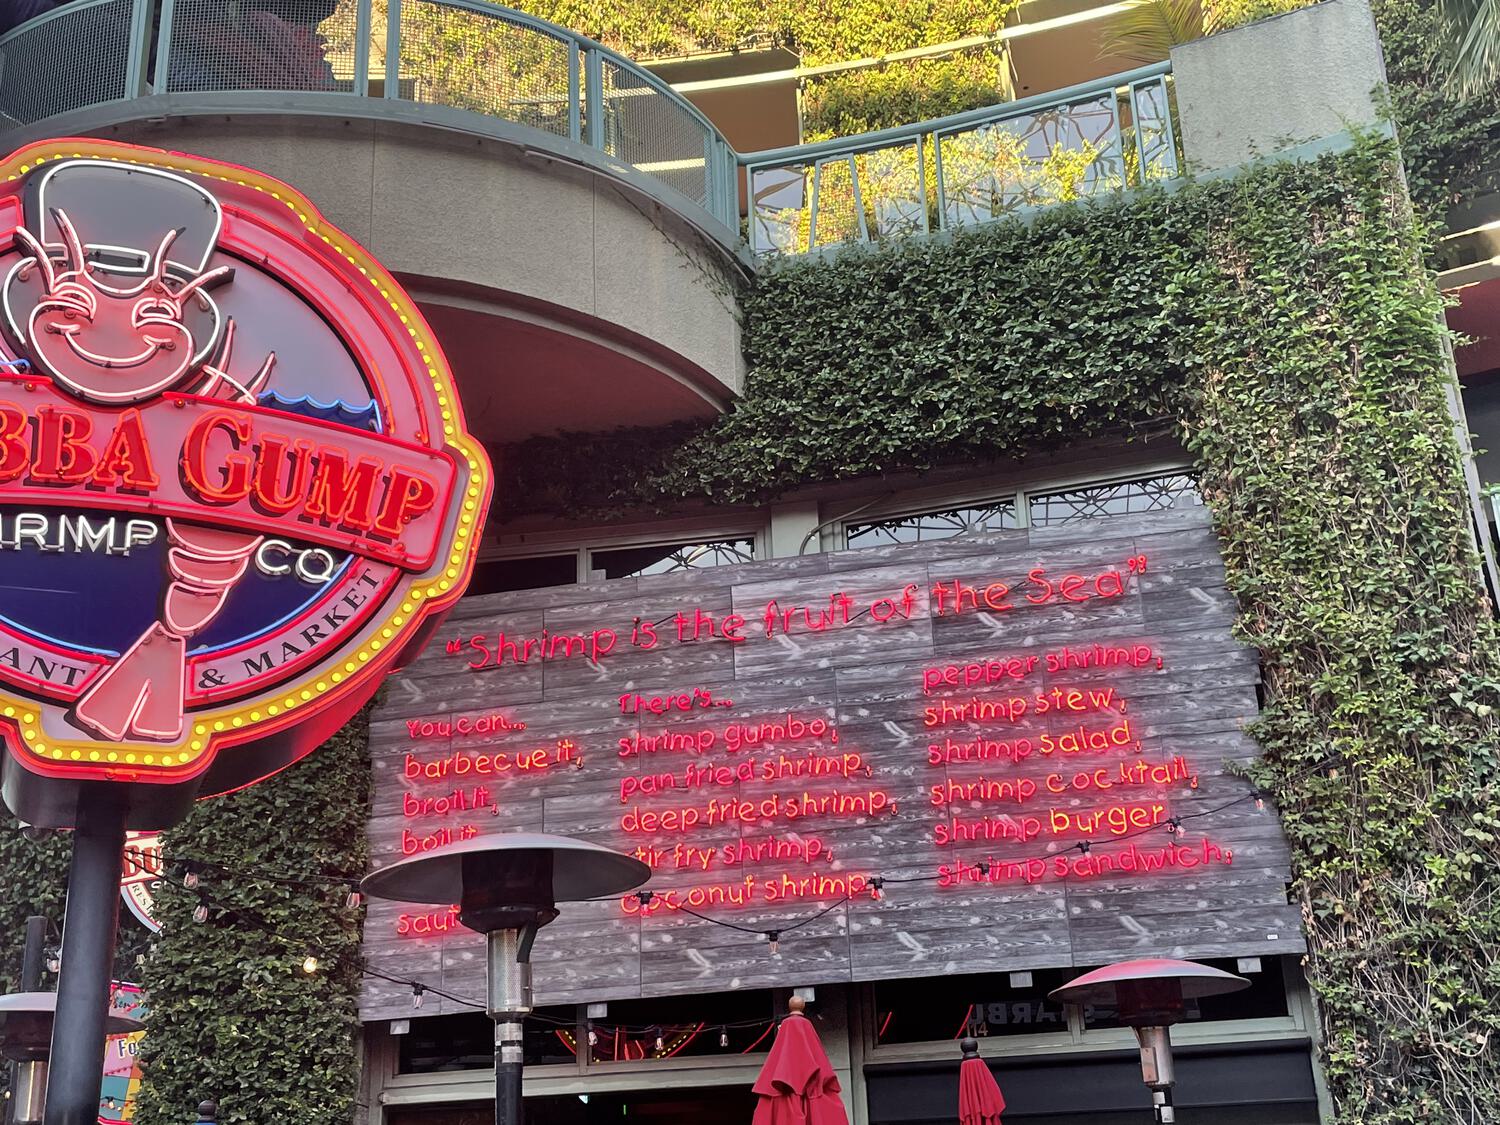 A neon sign above the Bubba Gump entrance that recites the quote from Forrest Gump enumerating all the ways to prepare shrimp